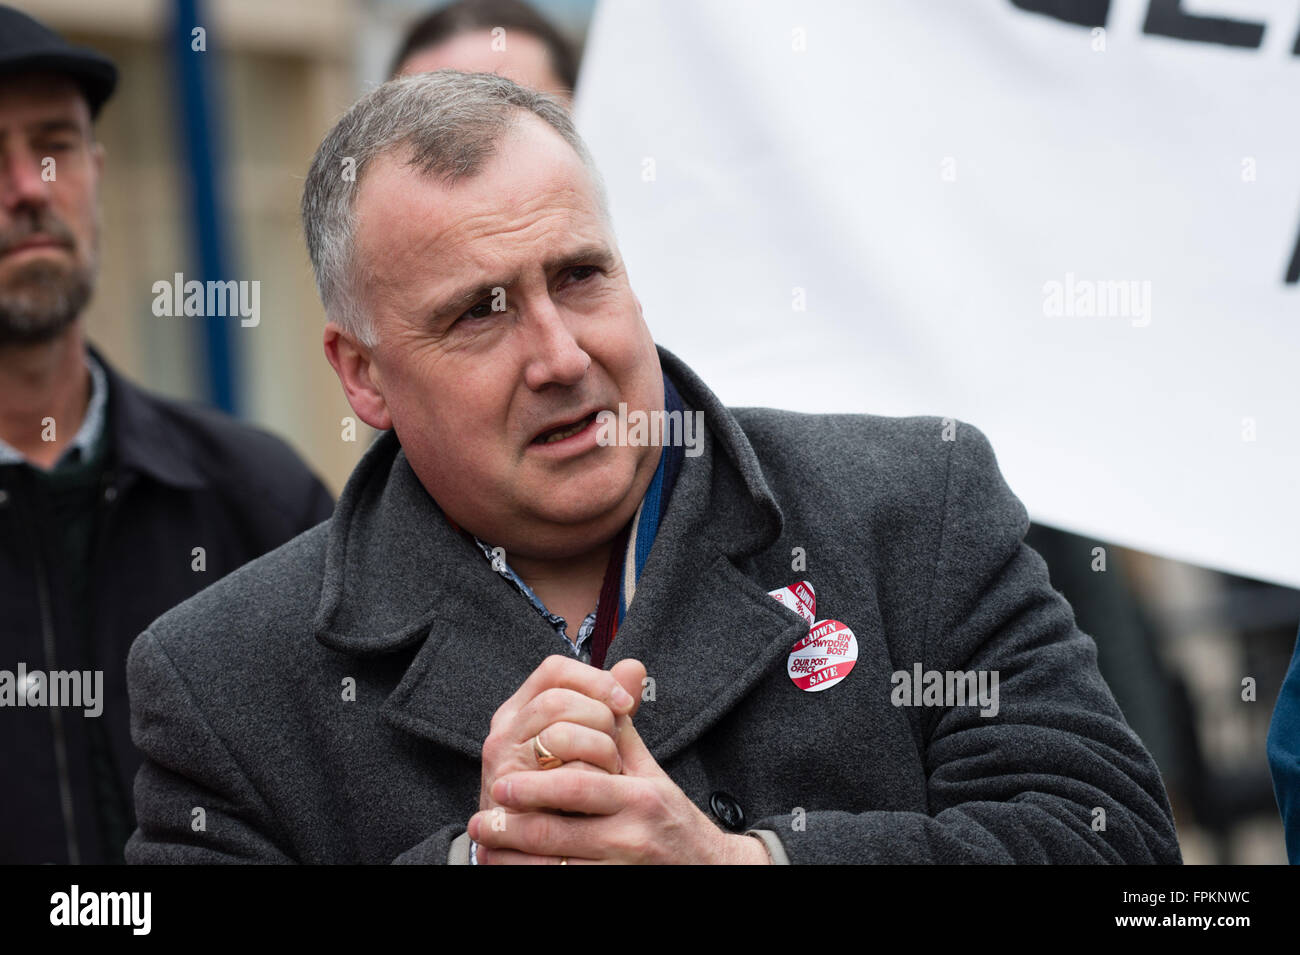 Aberystwyth, Wales, UK. 19th March, 2016. MARK WILLIAMS, Lib Dem MP for the Ceredigion constituency, at a public protest in the centre of Aberystwyth to protest at the planned closure of the town's only post office and to move the services it provides to a ‘franchise' in a shop or store photo Credit:  keith morris/Alamy Live News Stock Photo